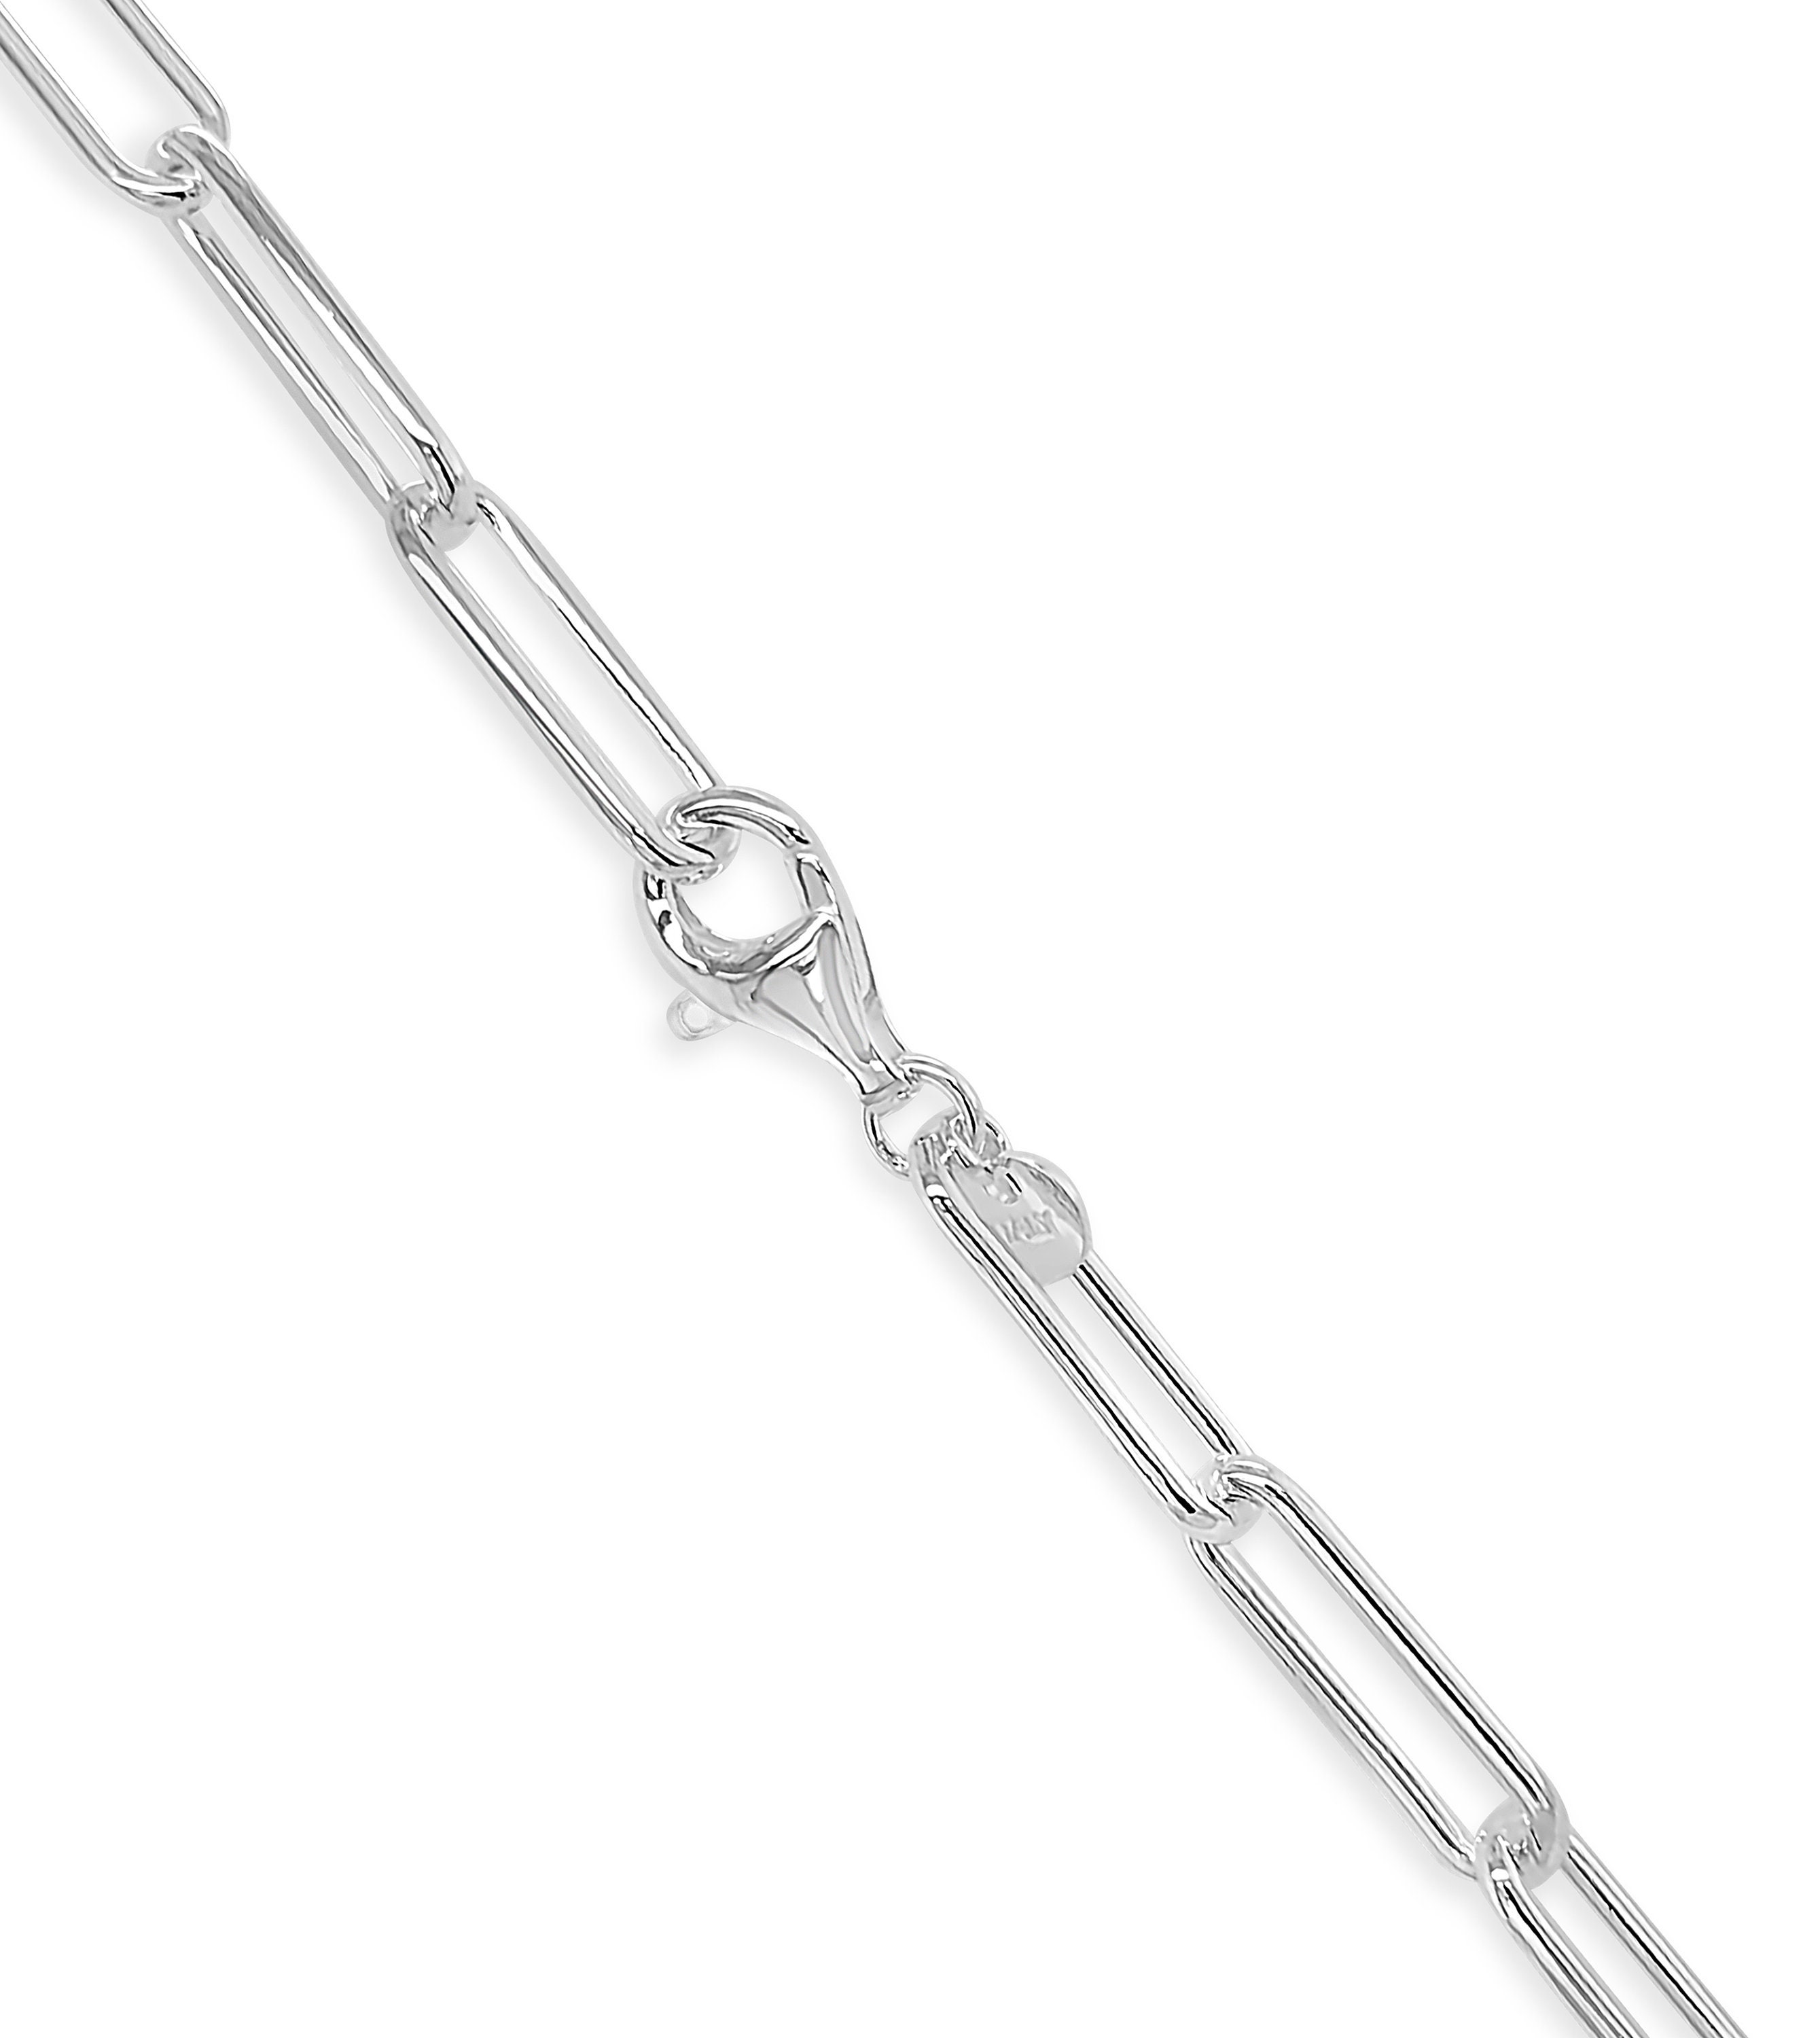  OCHCOH 925 Sterling Silver Clasp 2.5/3/4/5mm Paperclip Chain  for Women Silver Chain Necklace 16, 18, 20, 22, 24, 26, 30 Inches :  Clothing